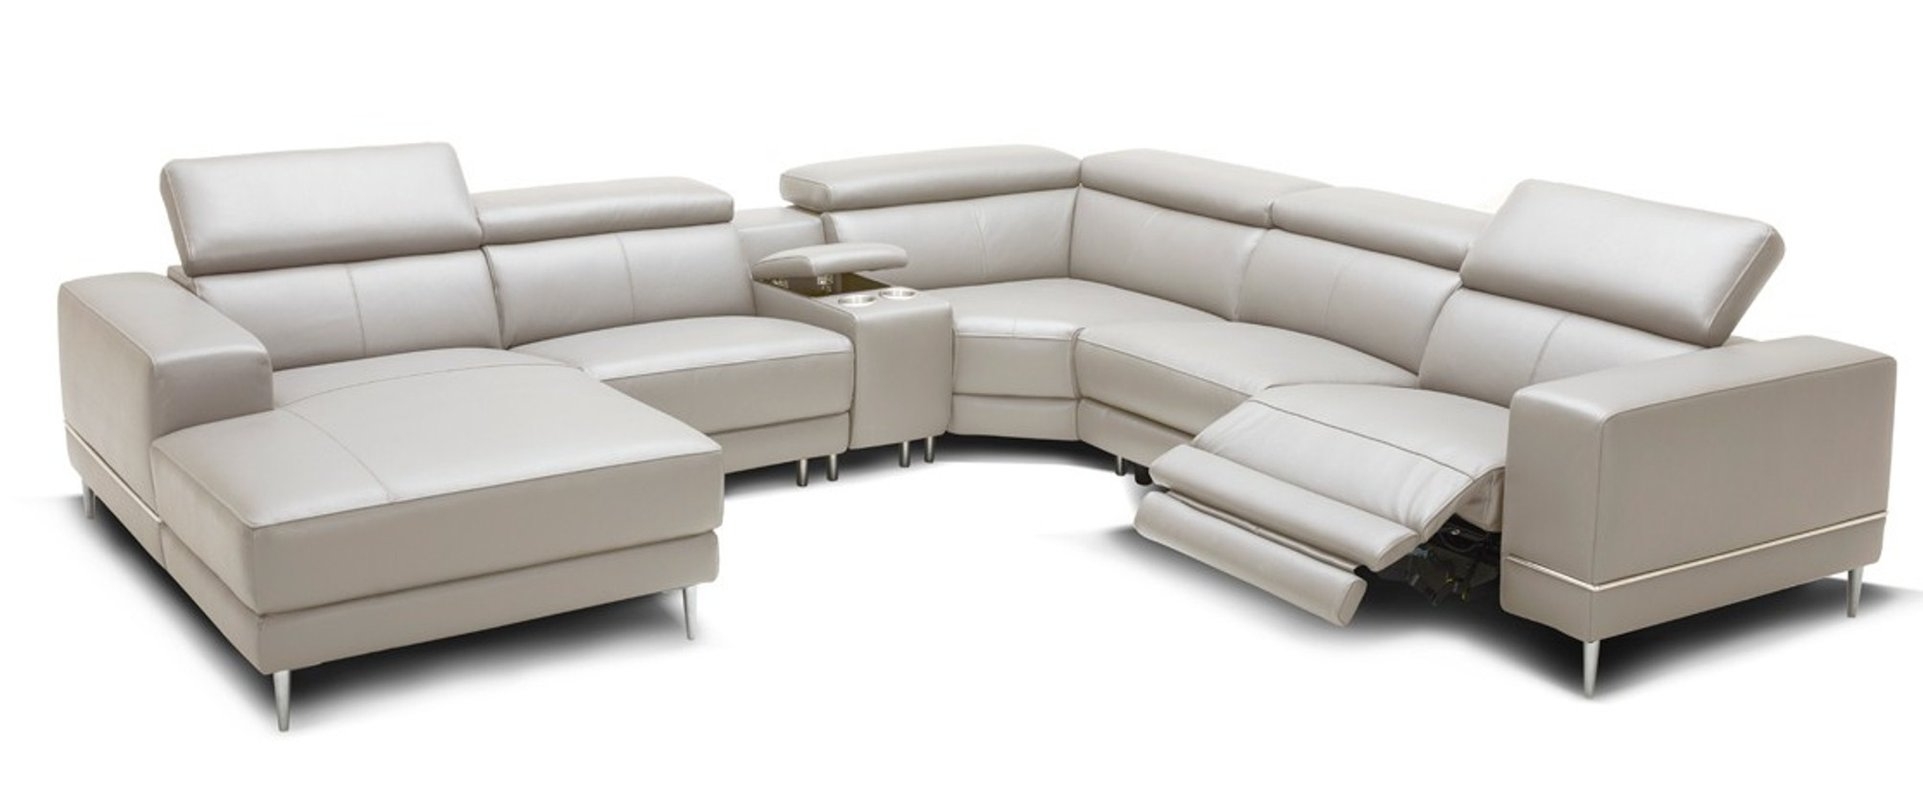 Shultz Leather Reclining Sectional - Image 0